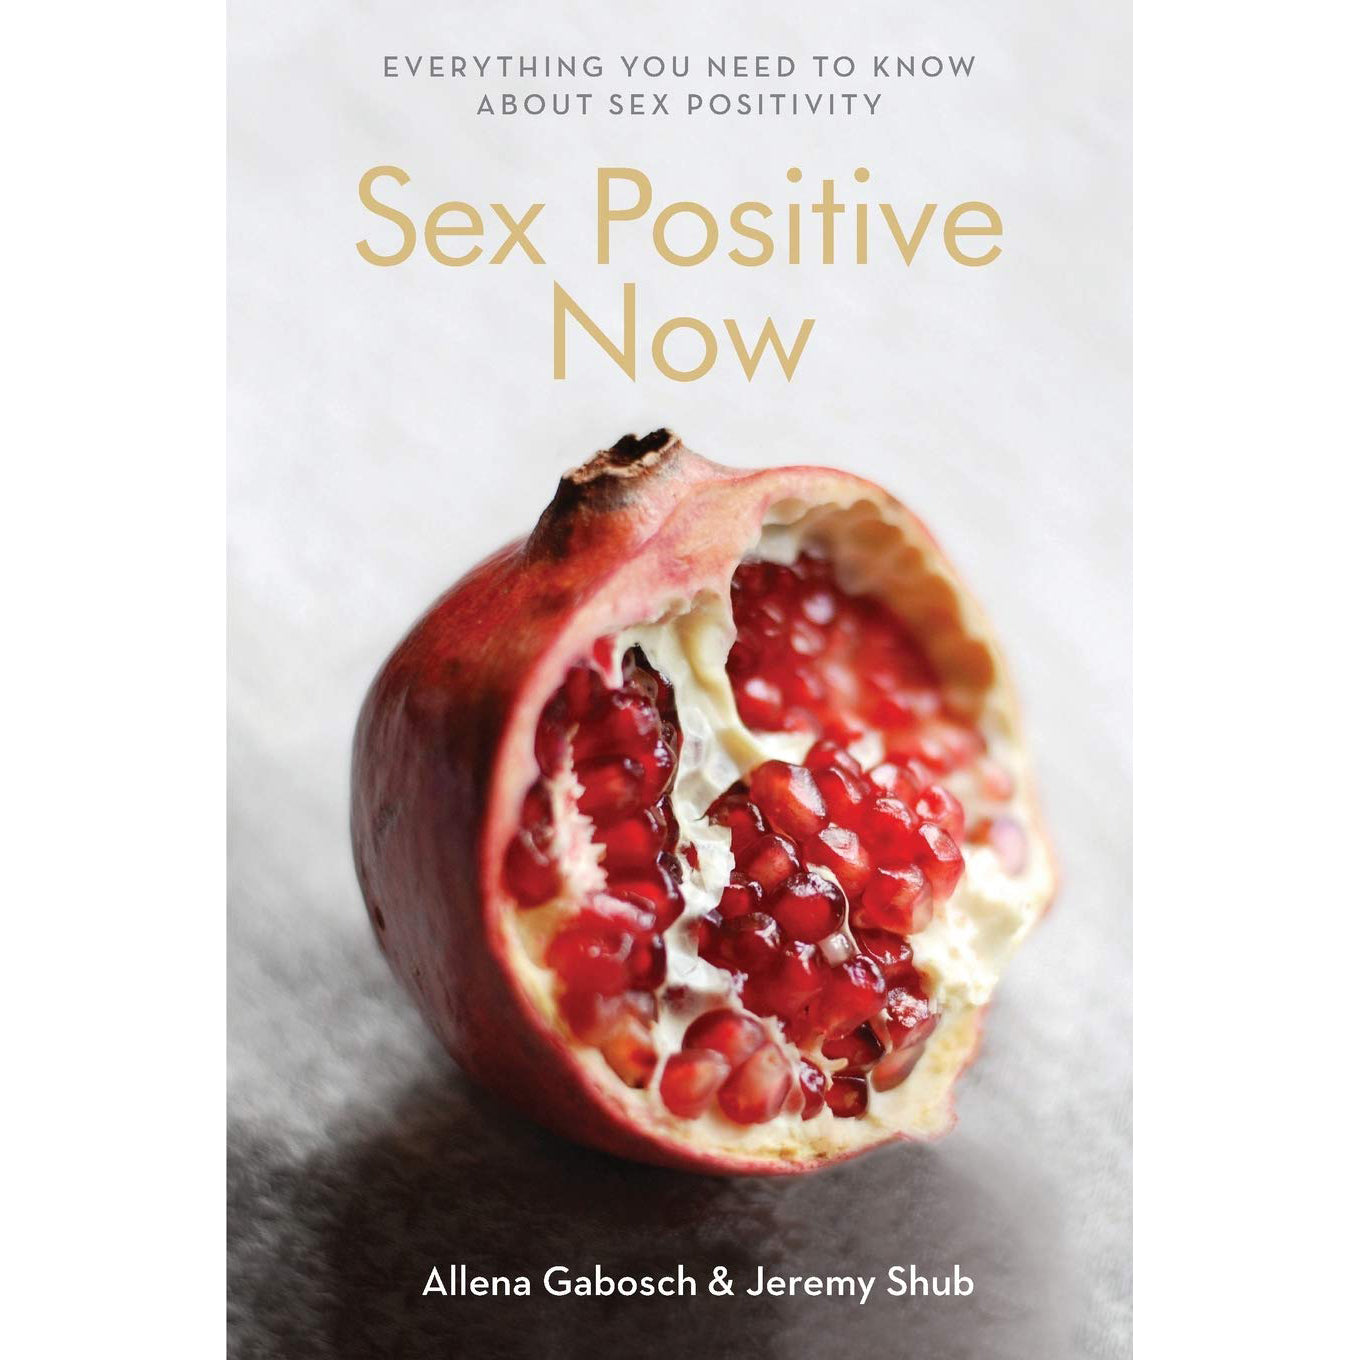 Sex Positive Now: Everything You Need to Know About Sex Positivity Edited by Allena Gabosch and Jeremy Shub